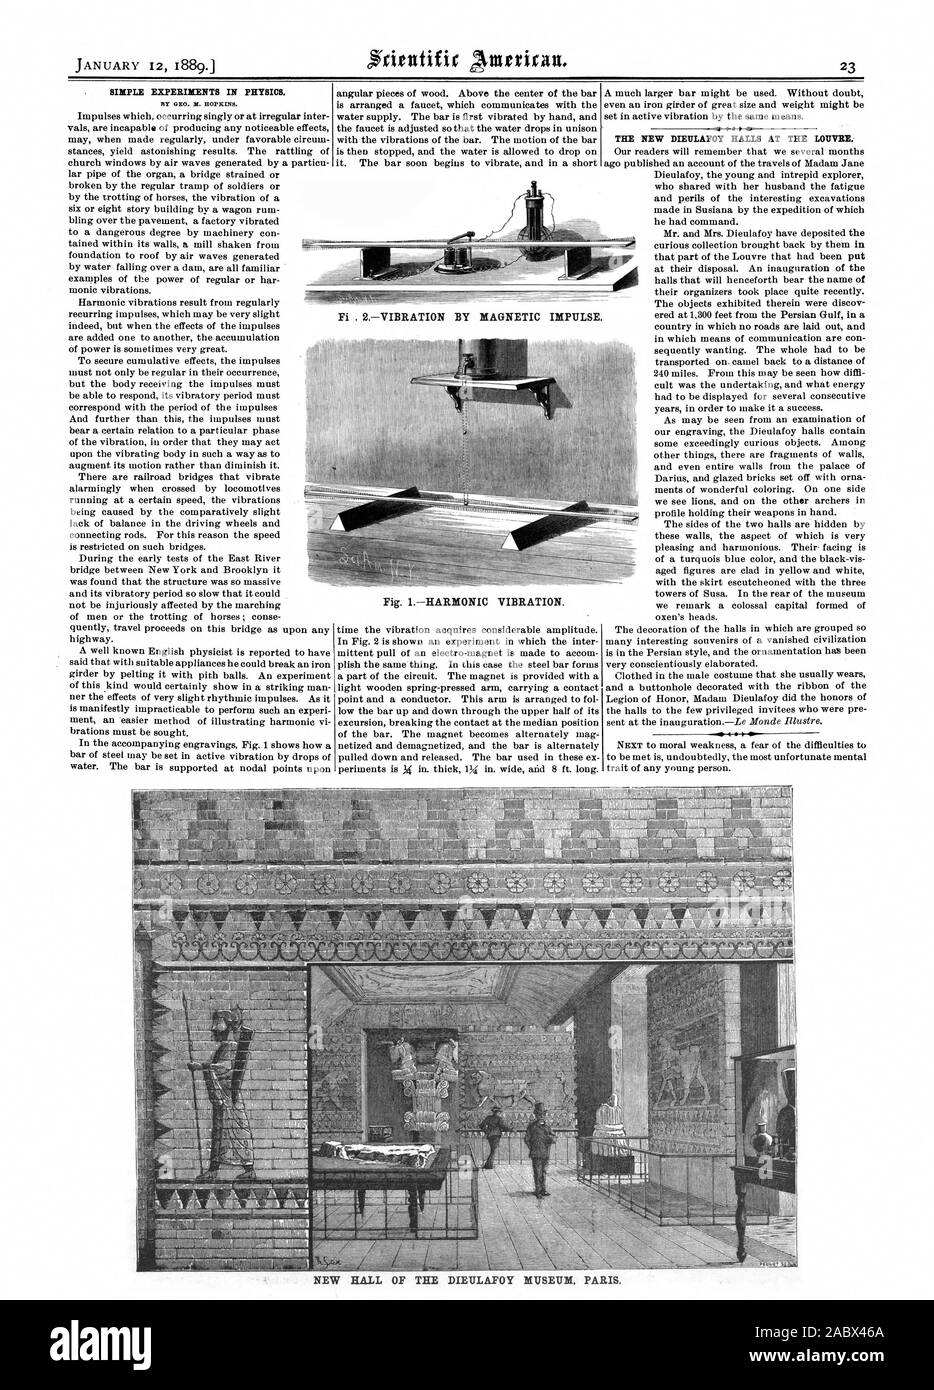 SIMPLE EXPERIMENTS IN PHYSICS. Fi 2VIBRATION BY MAGNETIC IMPULSE. Fig. 1HARMONIC VIBRATION. THE NEW DIEULAPOY HALLS AT THE LOUVRE.  PEllkOT NEW HALL OF THE DIEULAFOY MUSEUM PARIS.  1889 SCIENTIFIC AMERICAN INC., 1889-01-12 Stock Photo